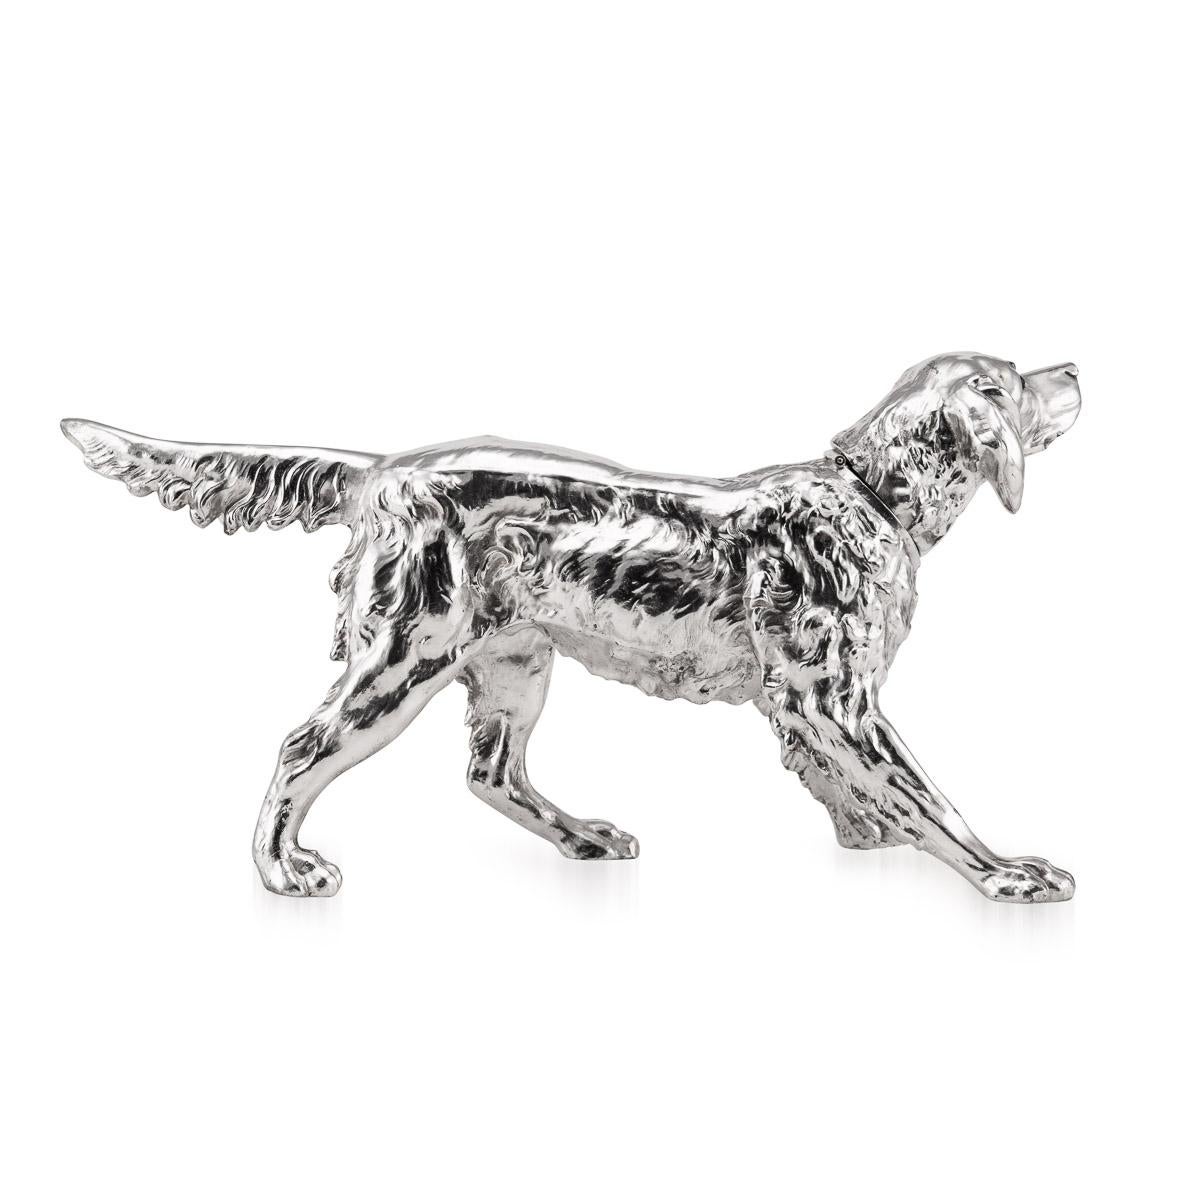 20th Century Silver Plated Statue of a Retriever Dog, C.1920 In Good Condition For Sale In Royal Tunbridge Wells, Kent